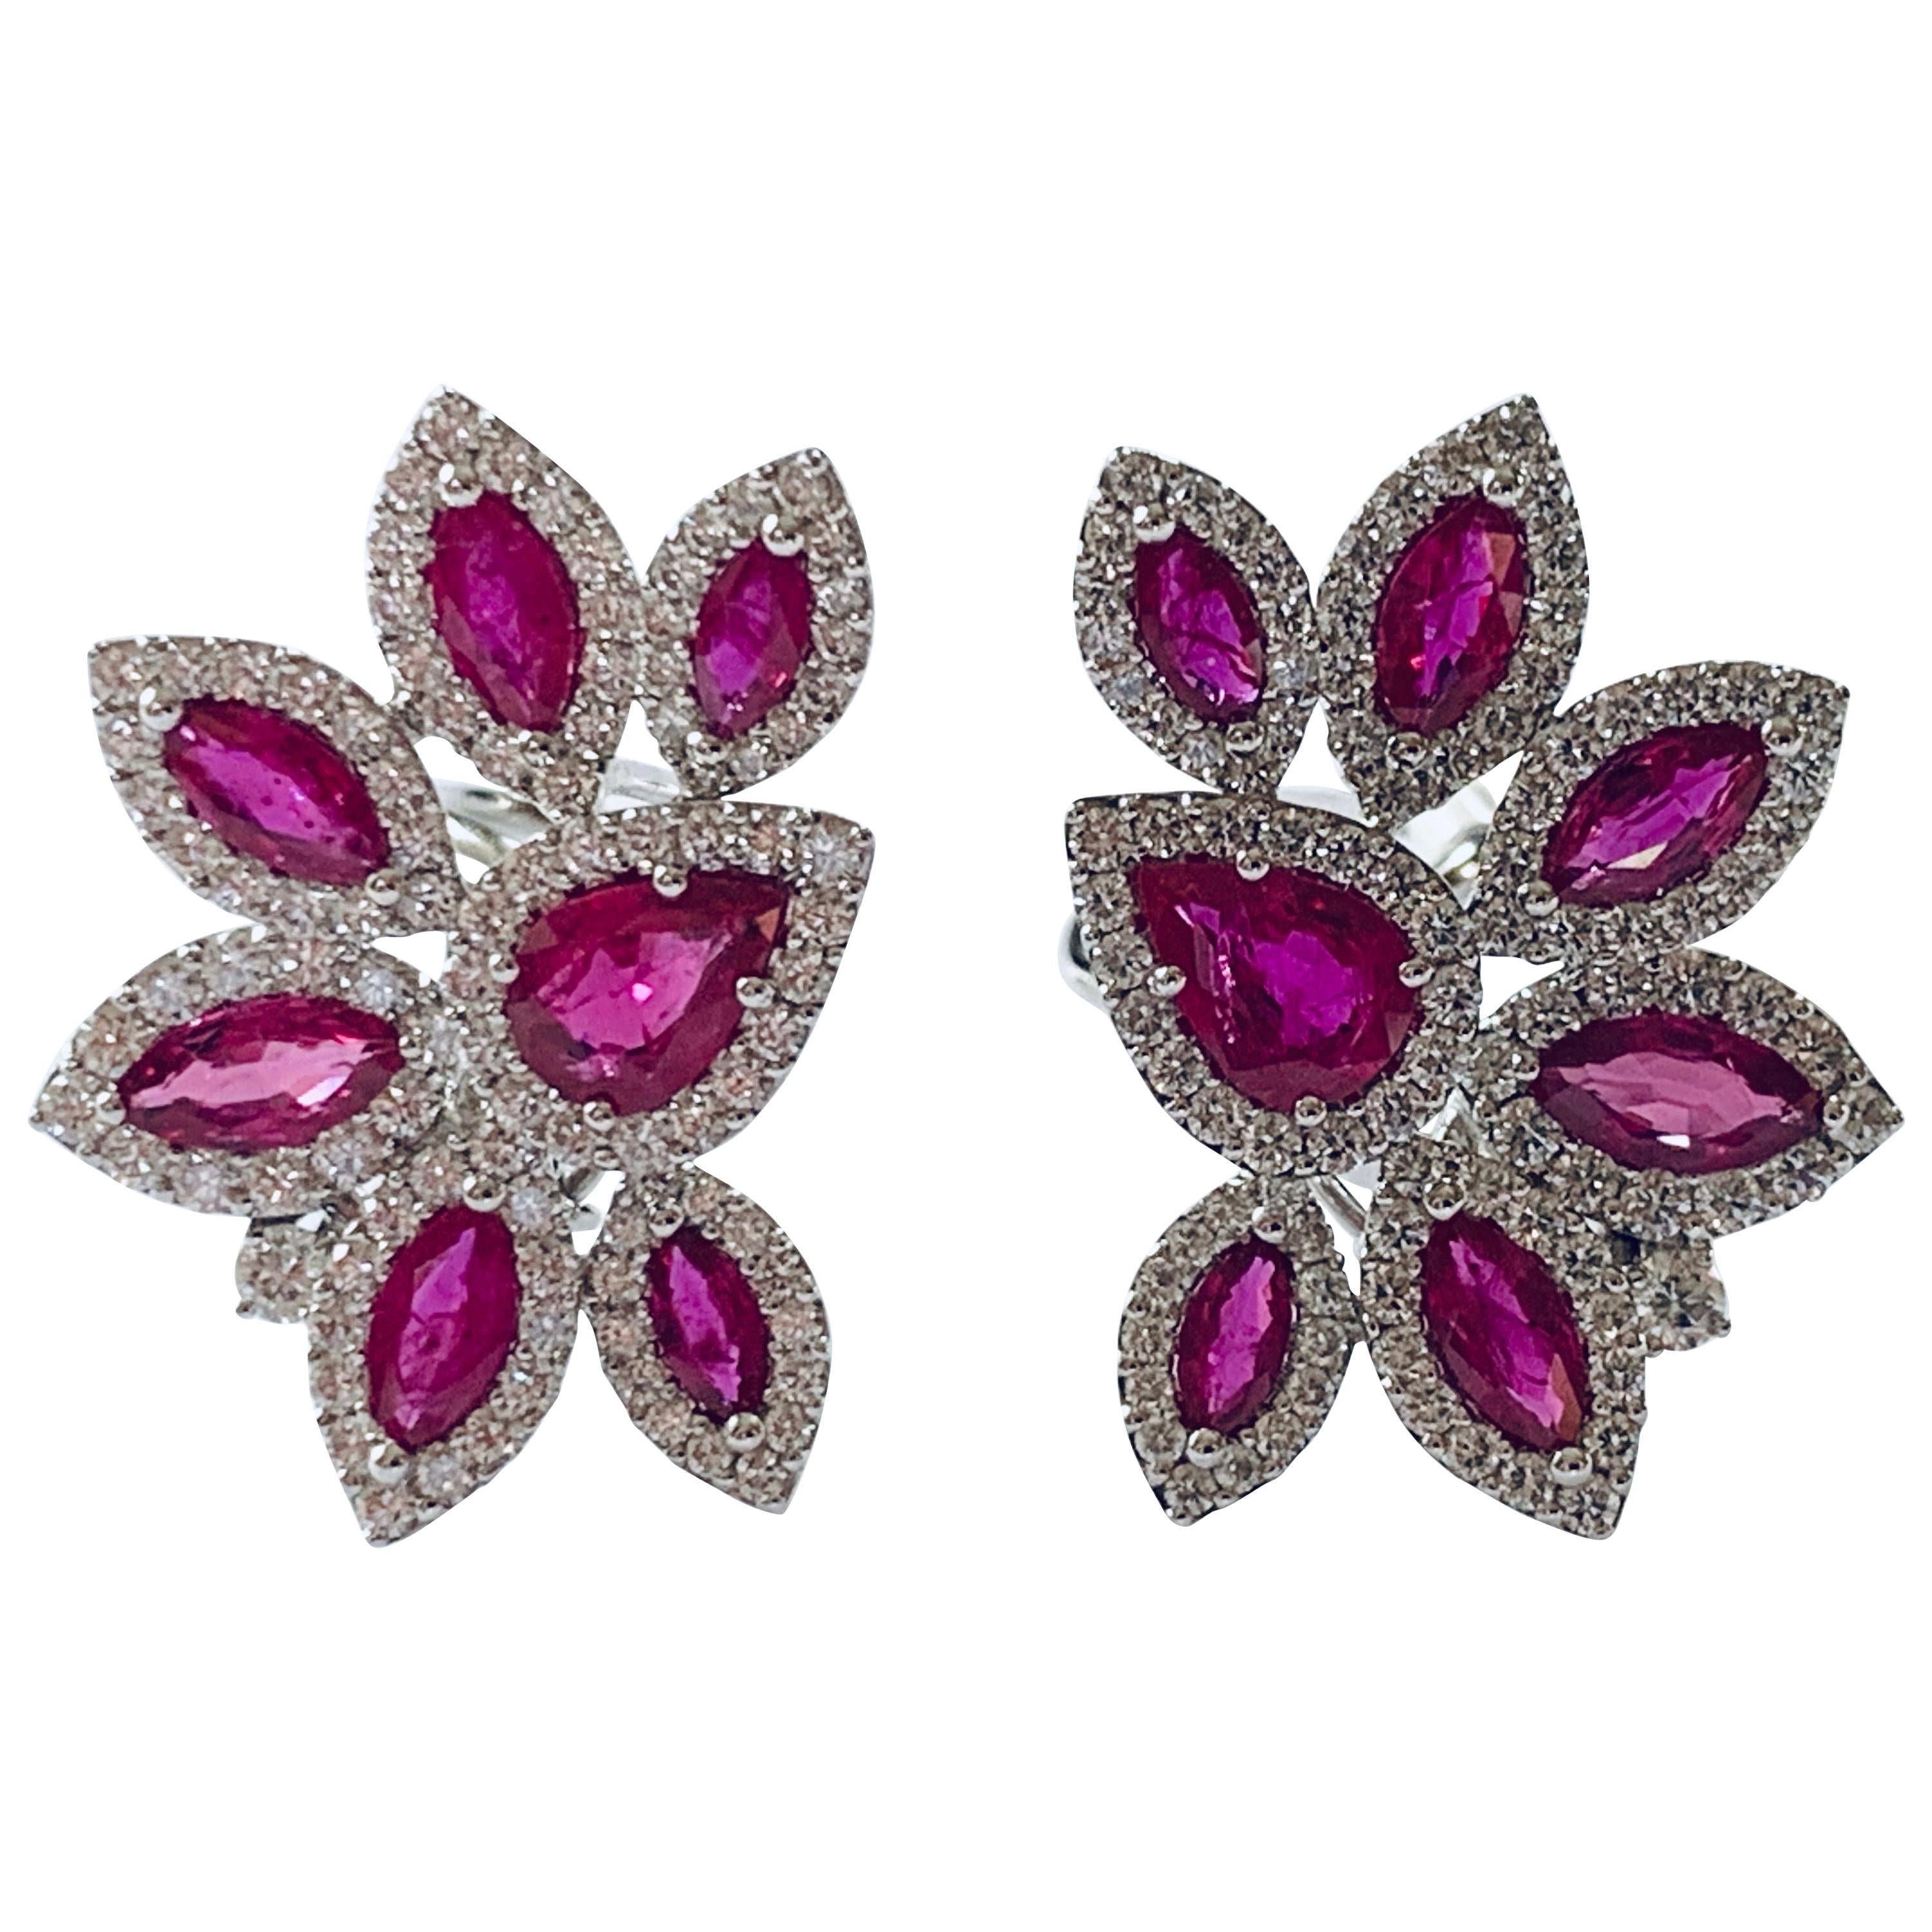 Elegant and Classy 18 Karat White Gold Ruby and Diamond Cluster Earrings